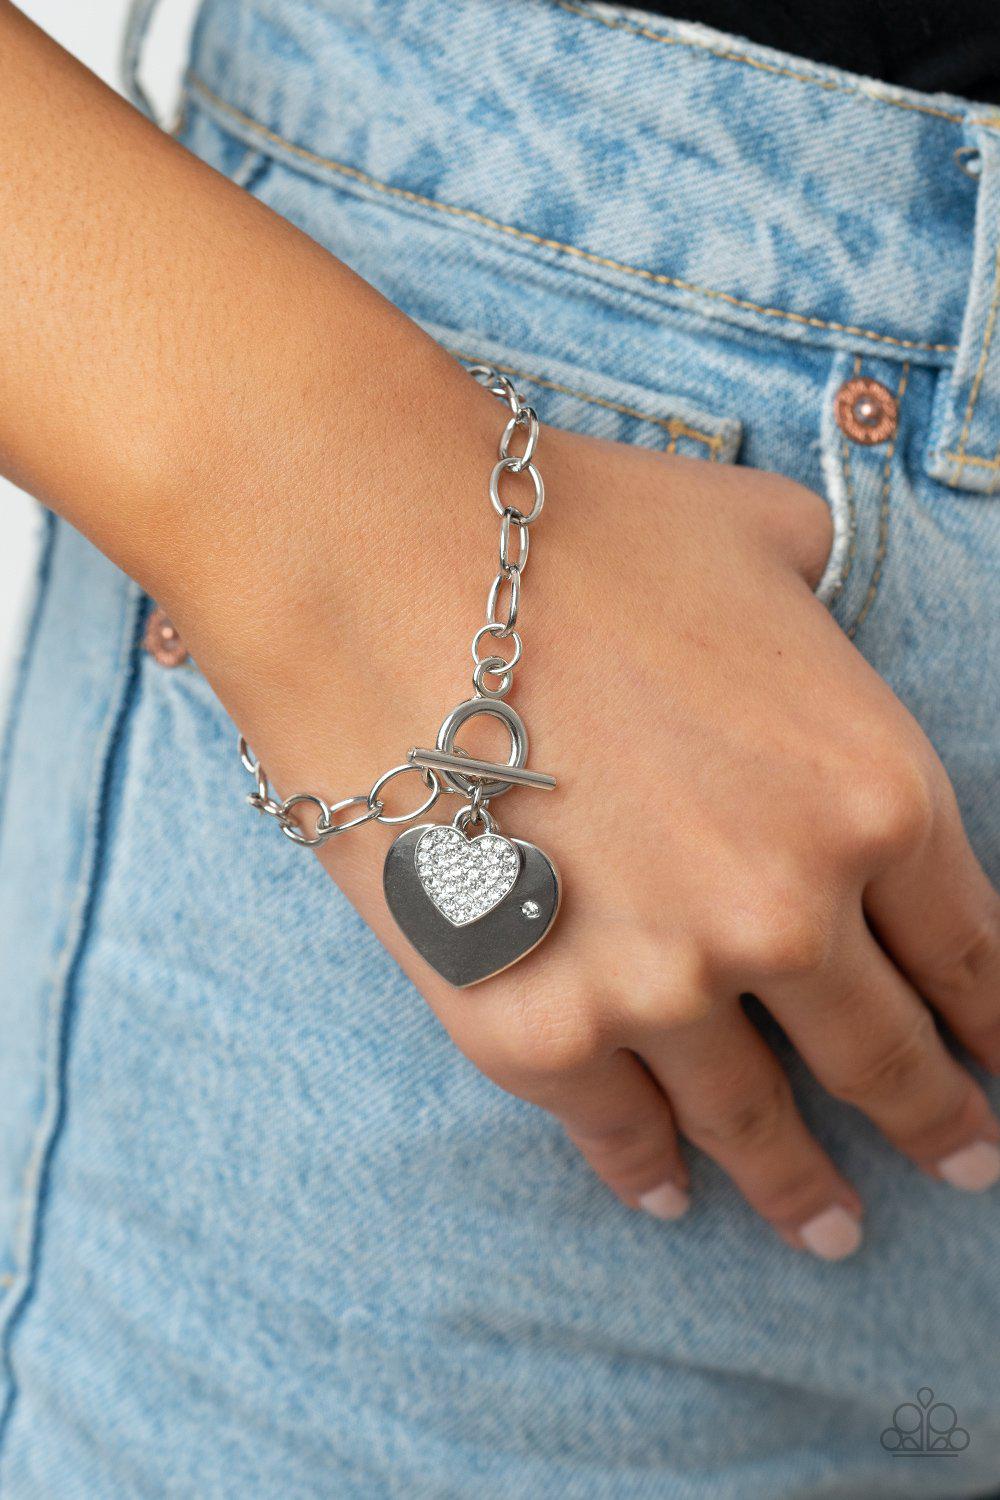 Heartbeat Bedazzle White and Silver Heart Bracelet - Paparazzi Accessories - model -CarasShop.com - $5 Jewelry by Cara Jewels